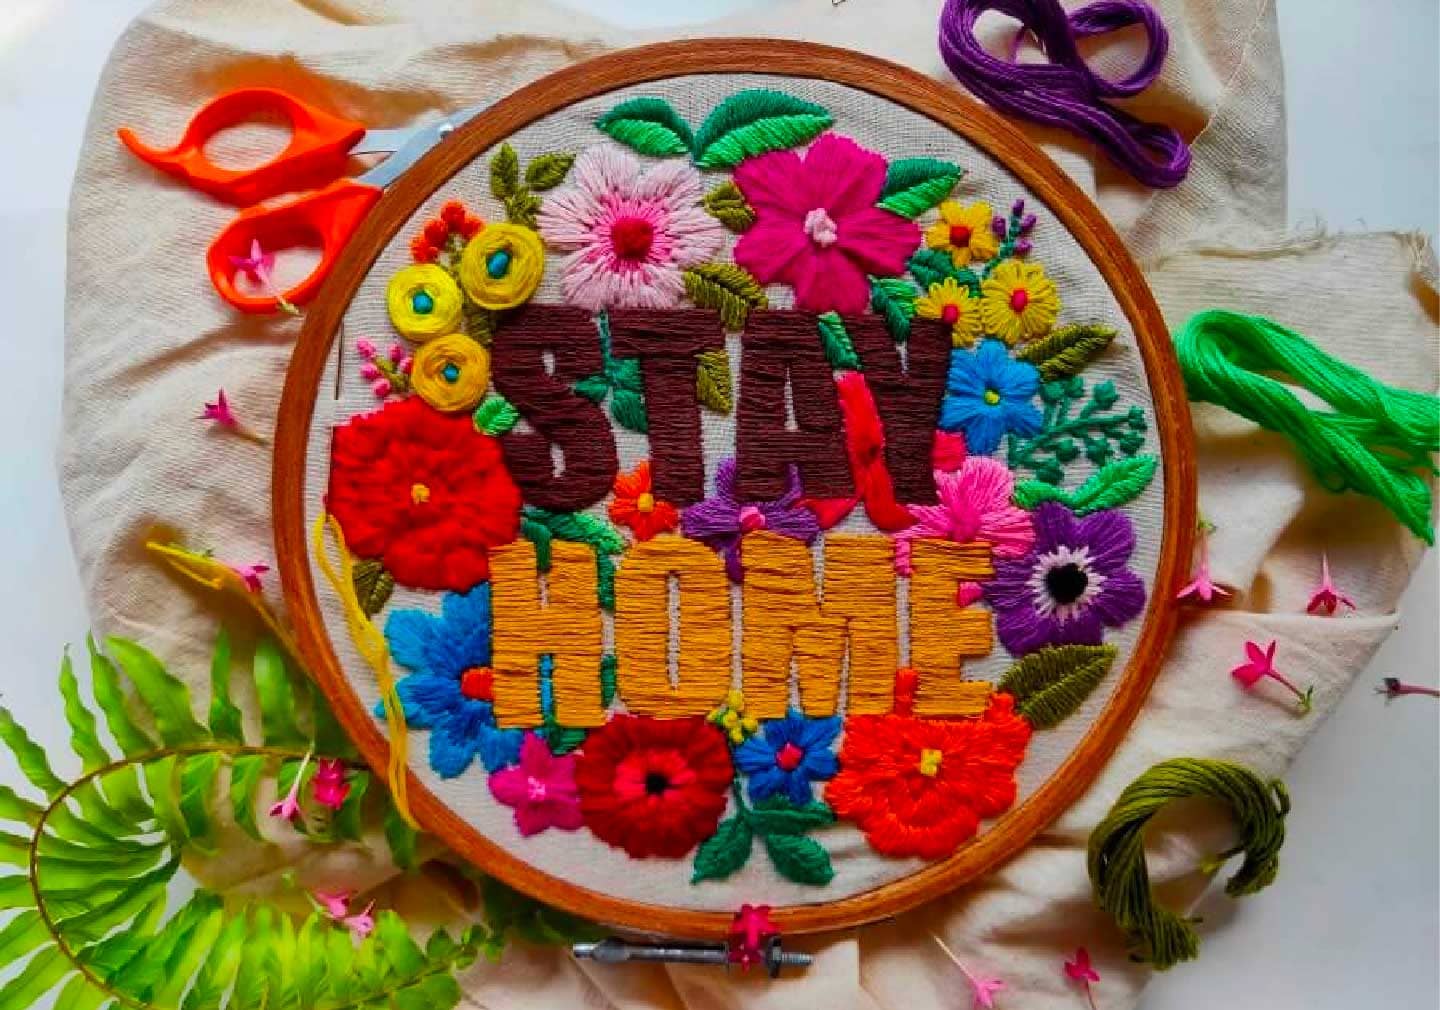 Embroidery Ring Wall - Wall Decorating Ideas For Room Decor